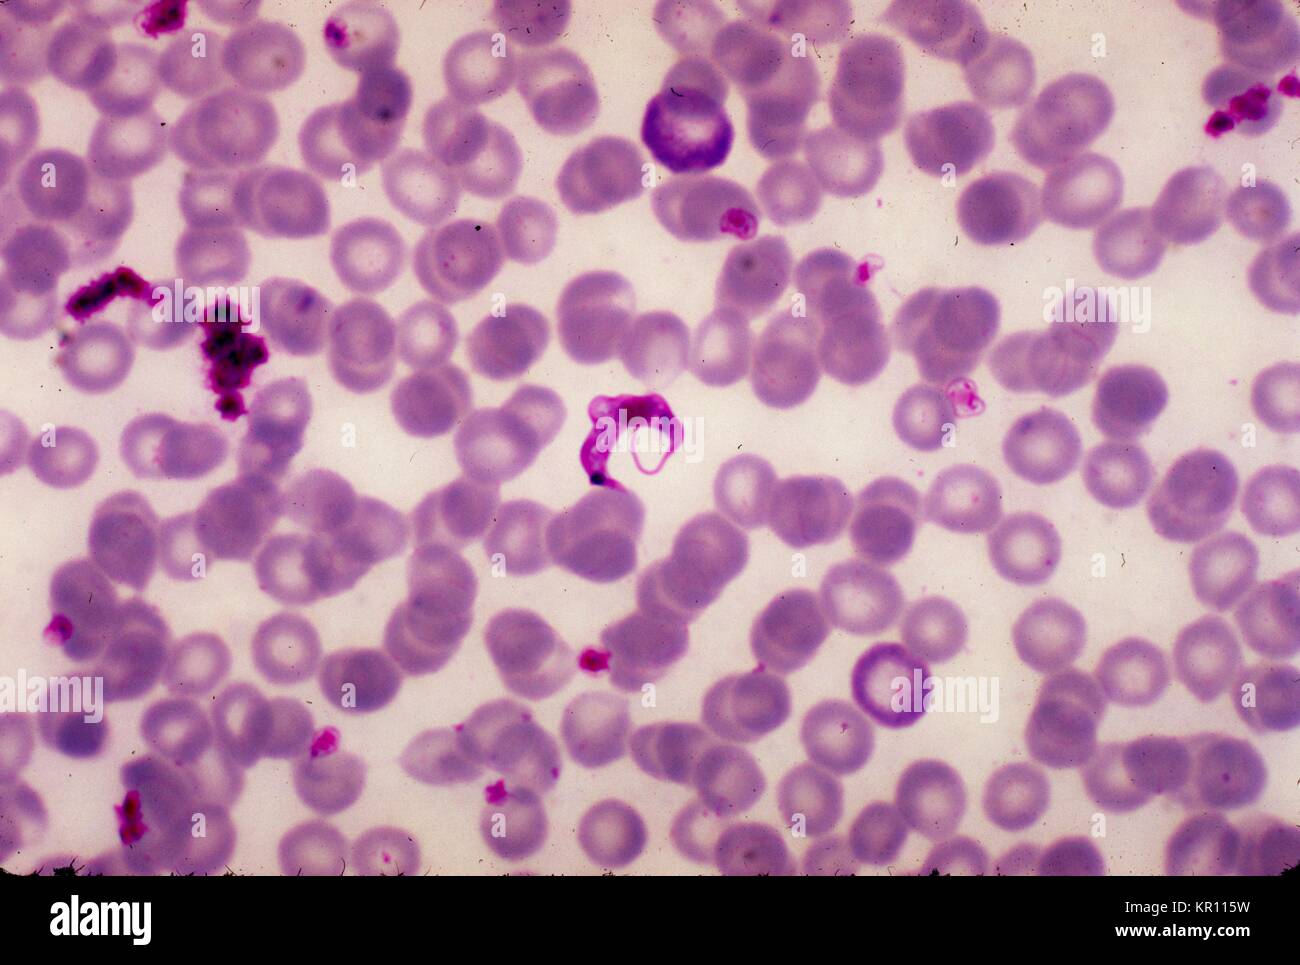 This is a micrograph of Trypanosoma cruzi in a blood smear using Giemsa staining technique, 1977. This protozoan parasite, T. cruzi, is the causative agent for Chagas disease, also known as ?. American trypanosomiasis?. It is estimated that 16 - 18 million people are infected with Chagas disease, and of those infected, 50, 000 will die each year. Image courtesy CDC/Dr. Mae Melvin. Stock Photo